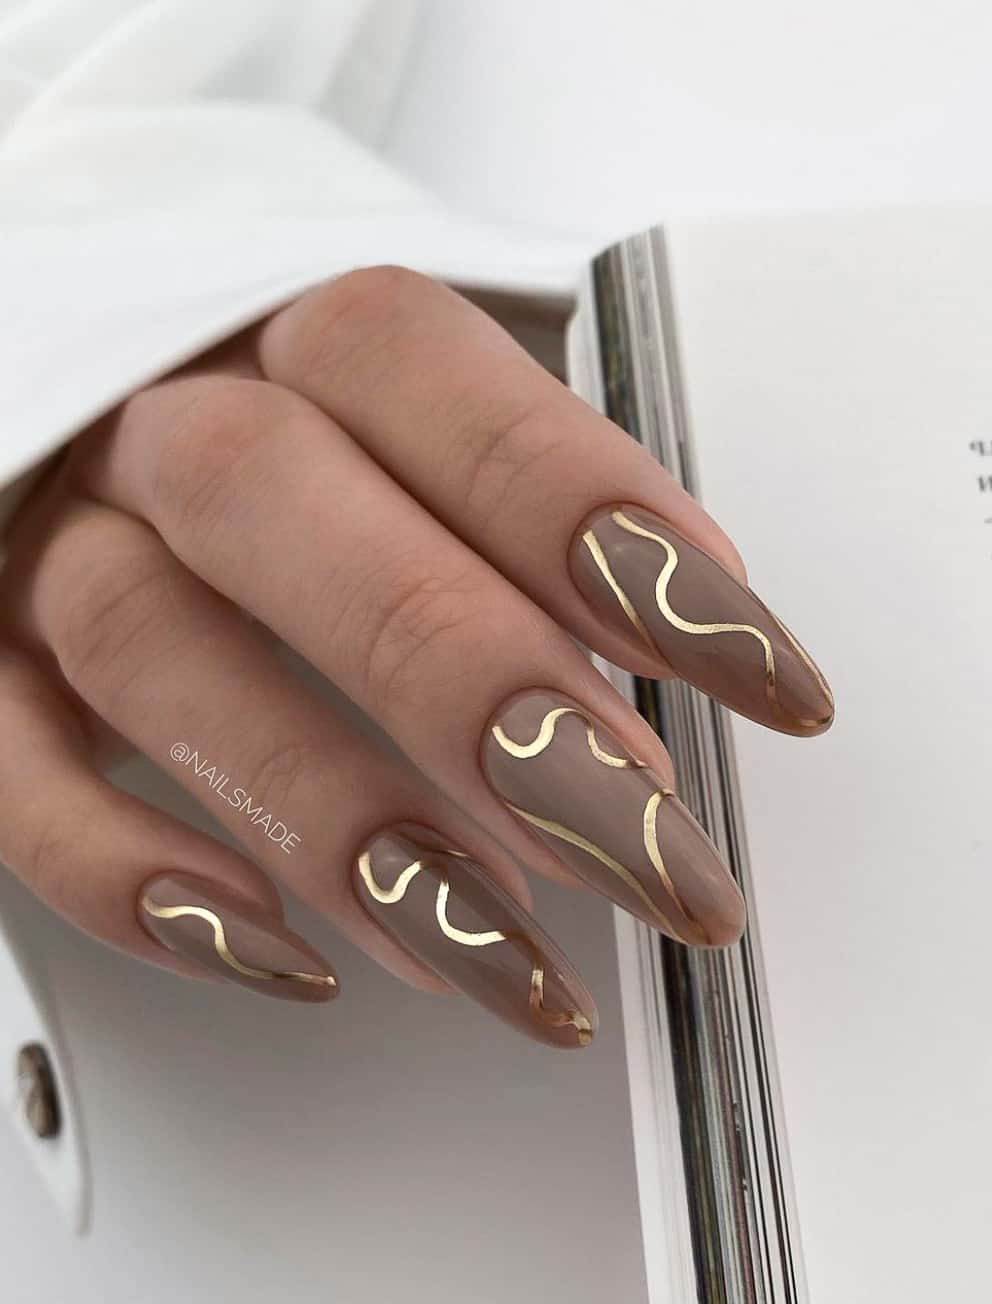 A hand with long almond nails painted in a light brown with gold swirls